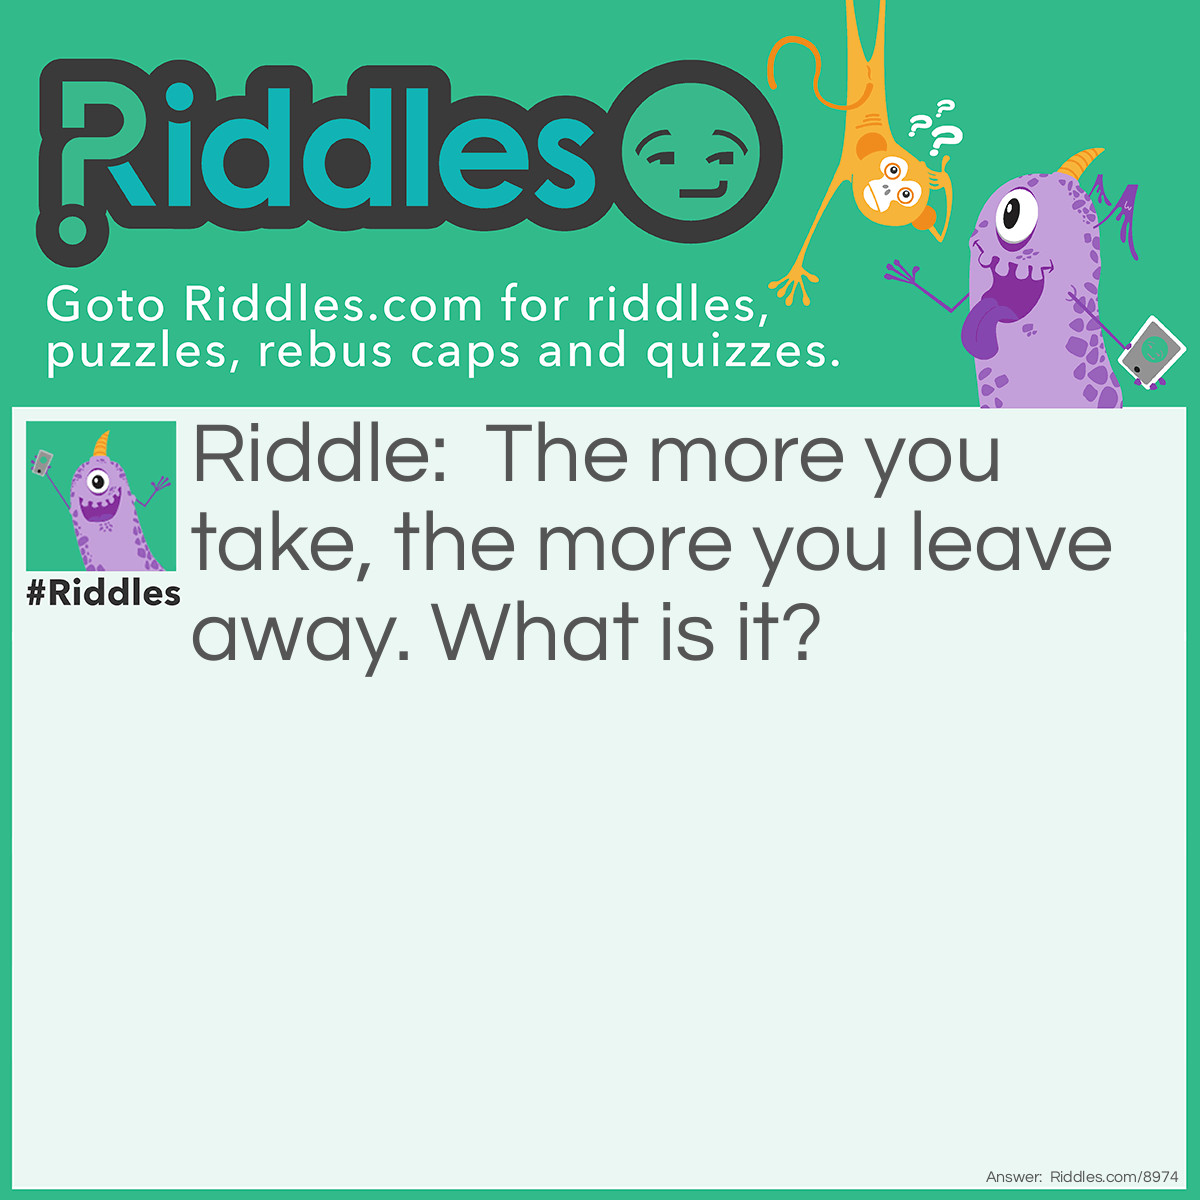 Riddle: The more you take, the more you leave away. What is it? Answer: Footsteps.